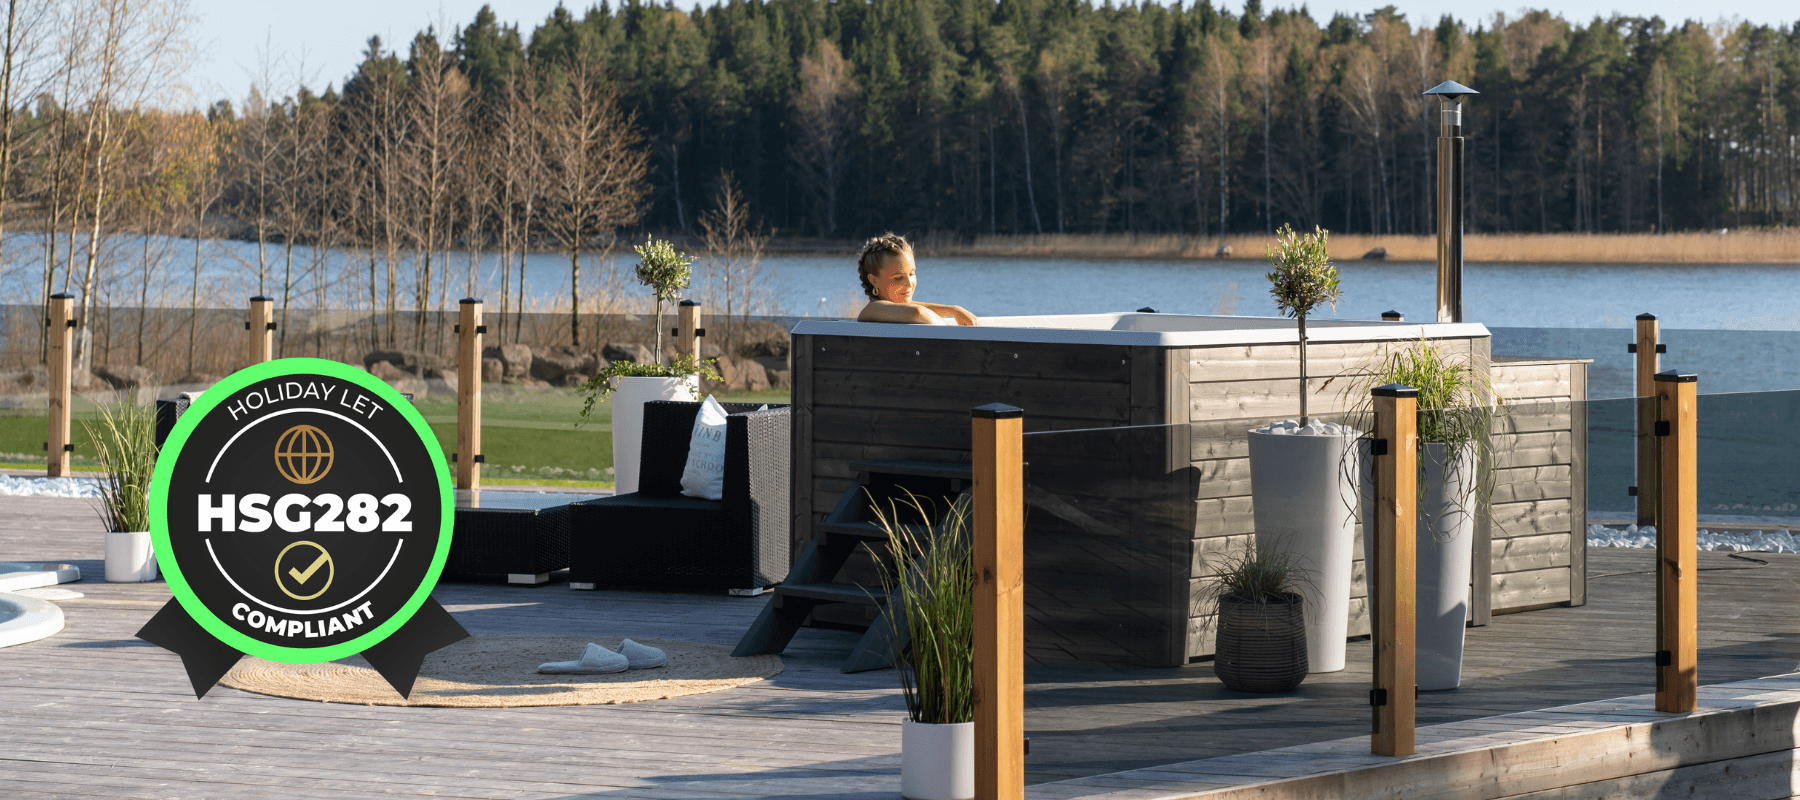 Holiday Let Glamping Lodge Eco Hot Tubs HSG282 Compliant